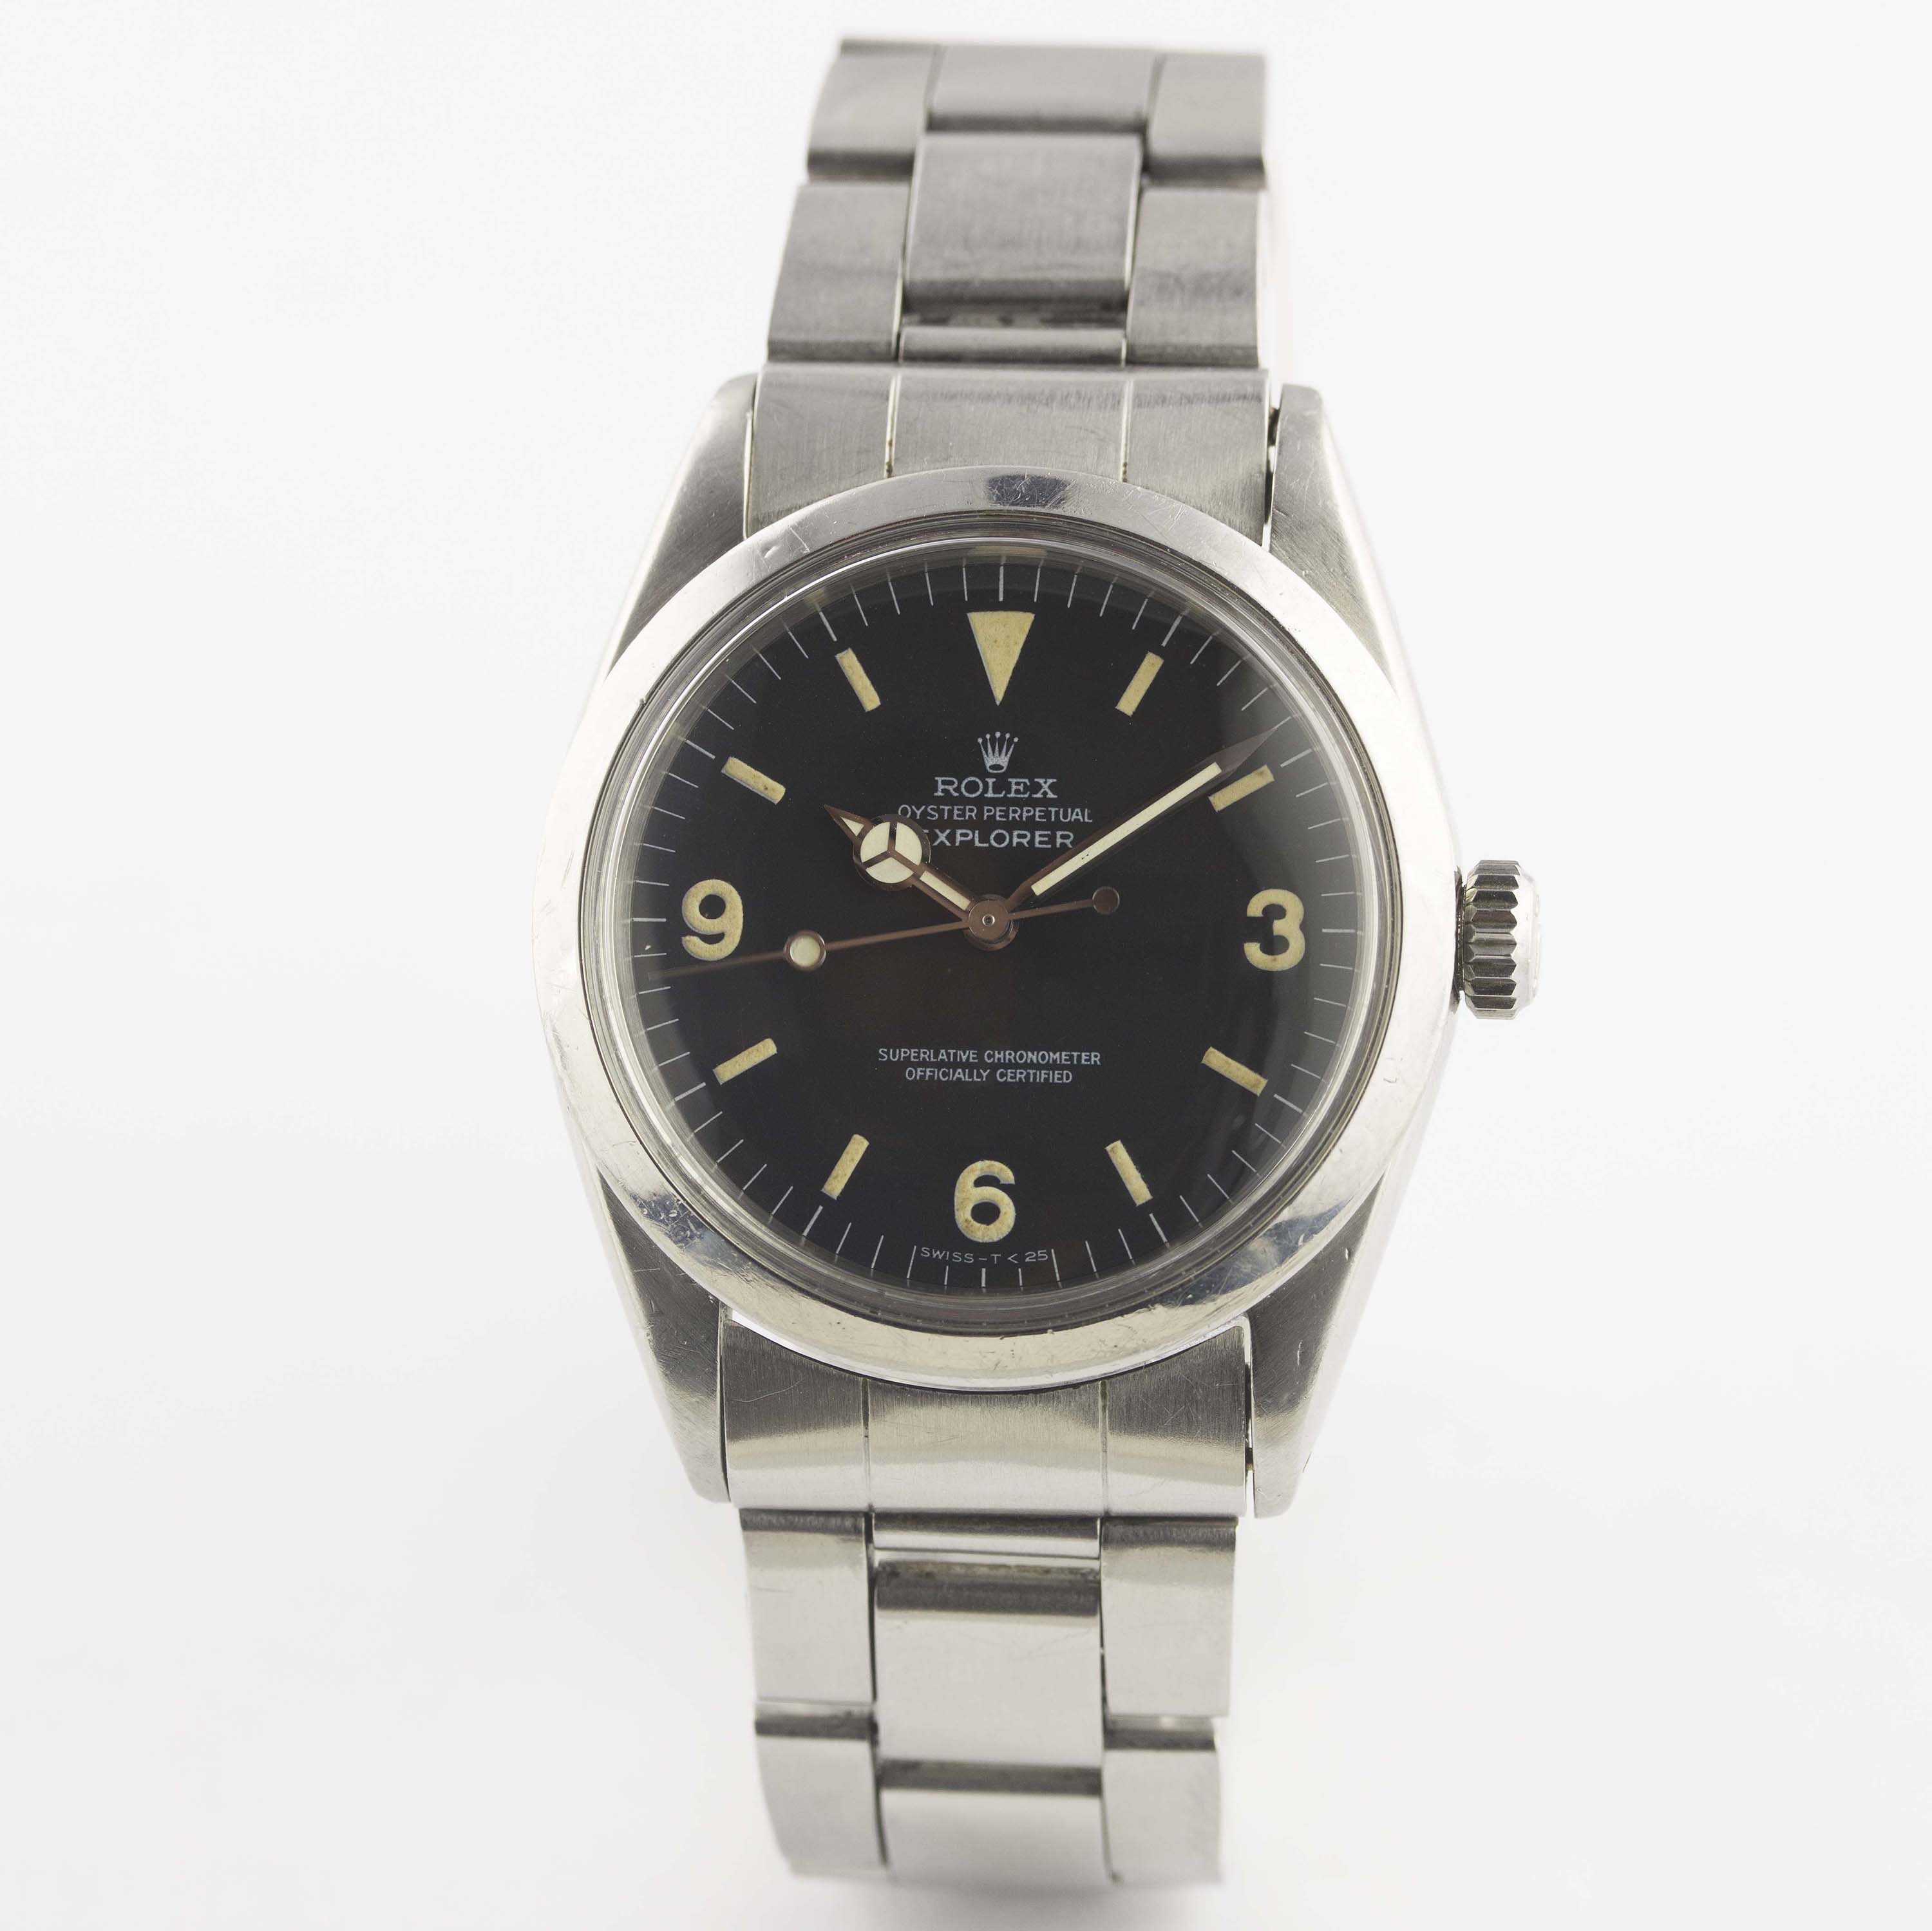 A GENTLEMAN'S STAINLESS STEEL ROLEX OYSTER PERPETUAL EXPLORER BRACELET WATCH CIRCA 1963, REF. 1016 - Image 2 of 11